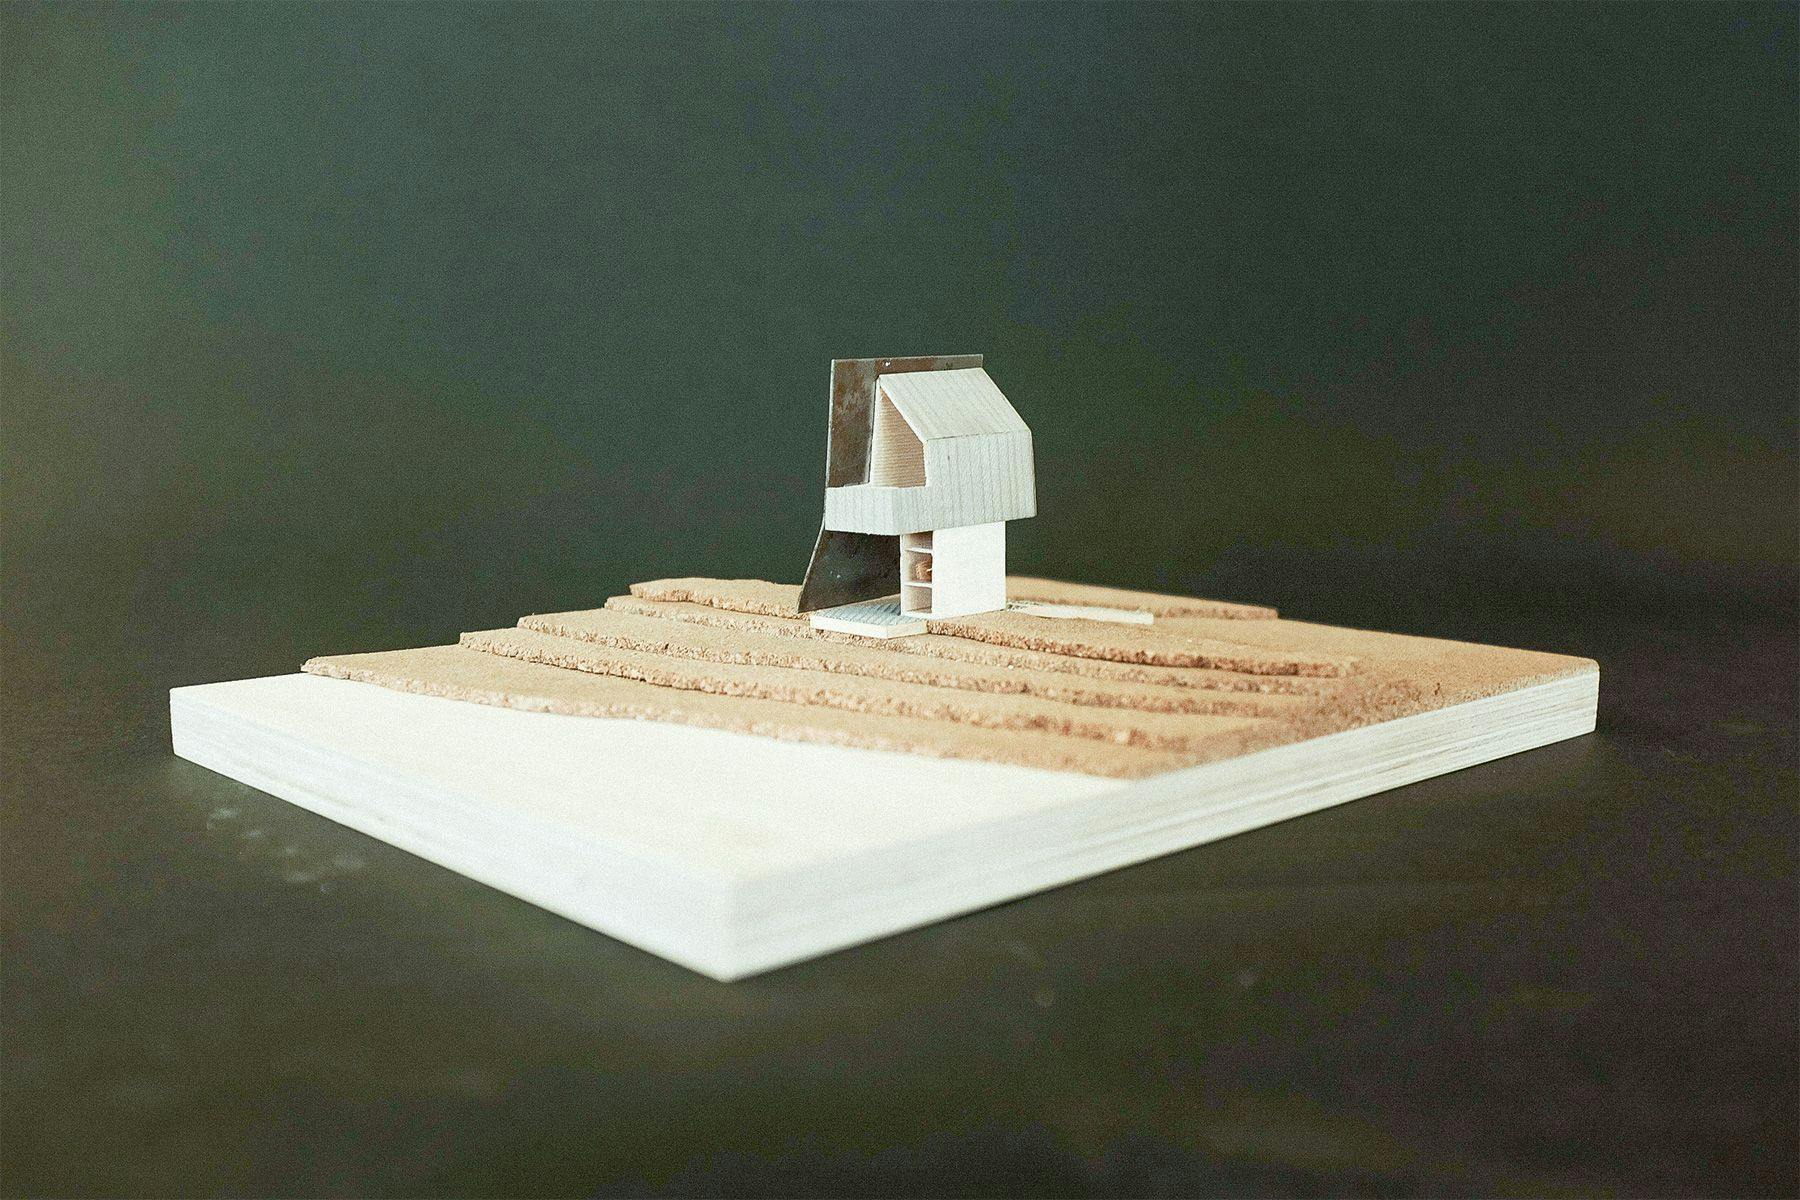 scale model of a surfboard look-out and storage structure